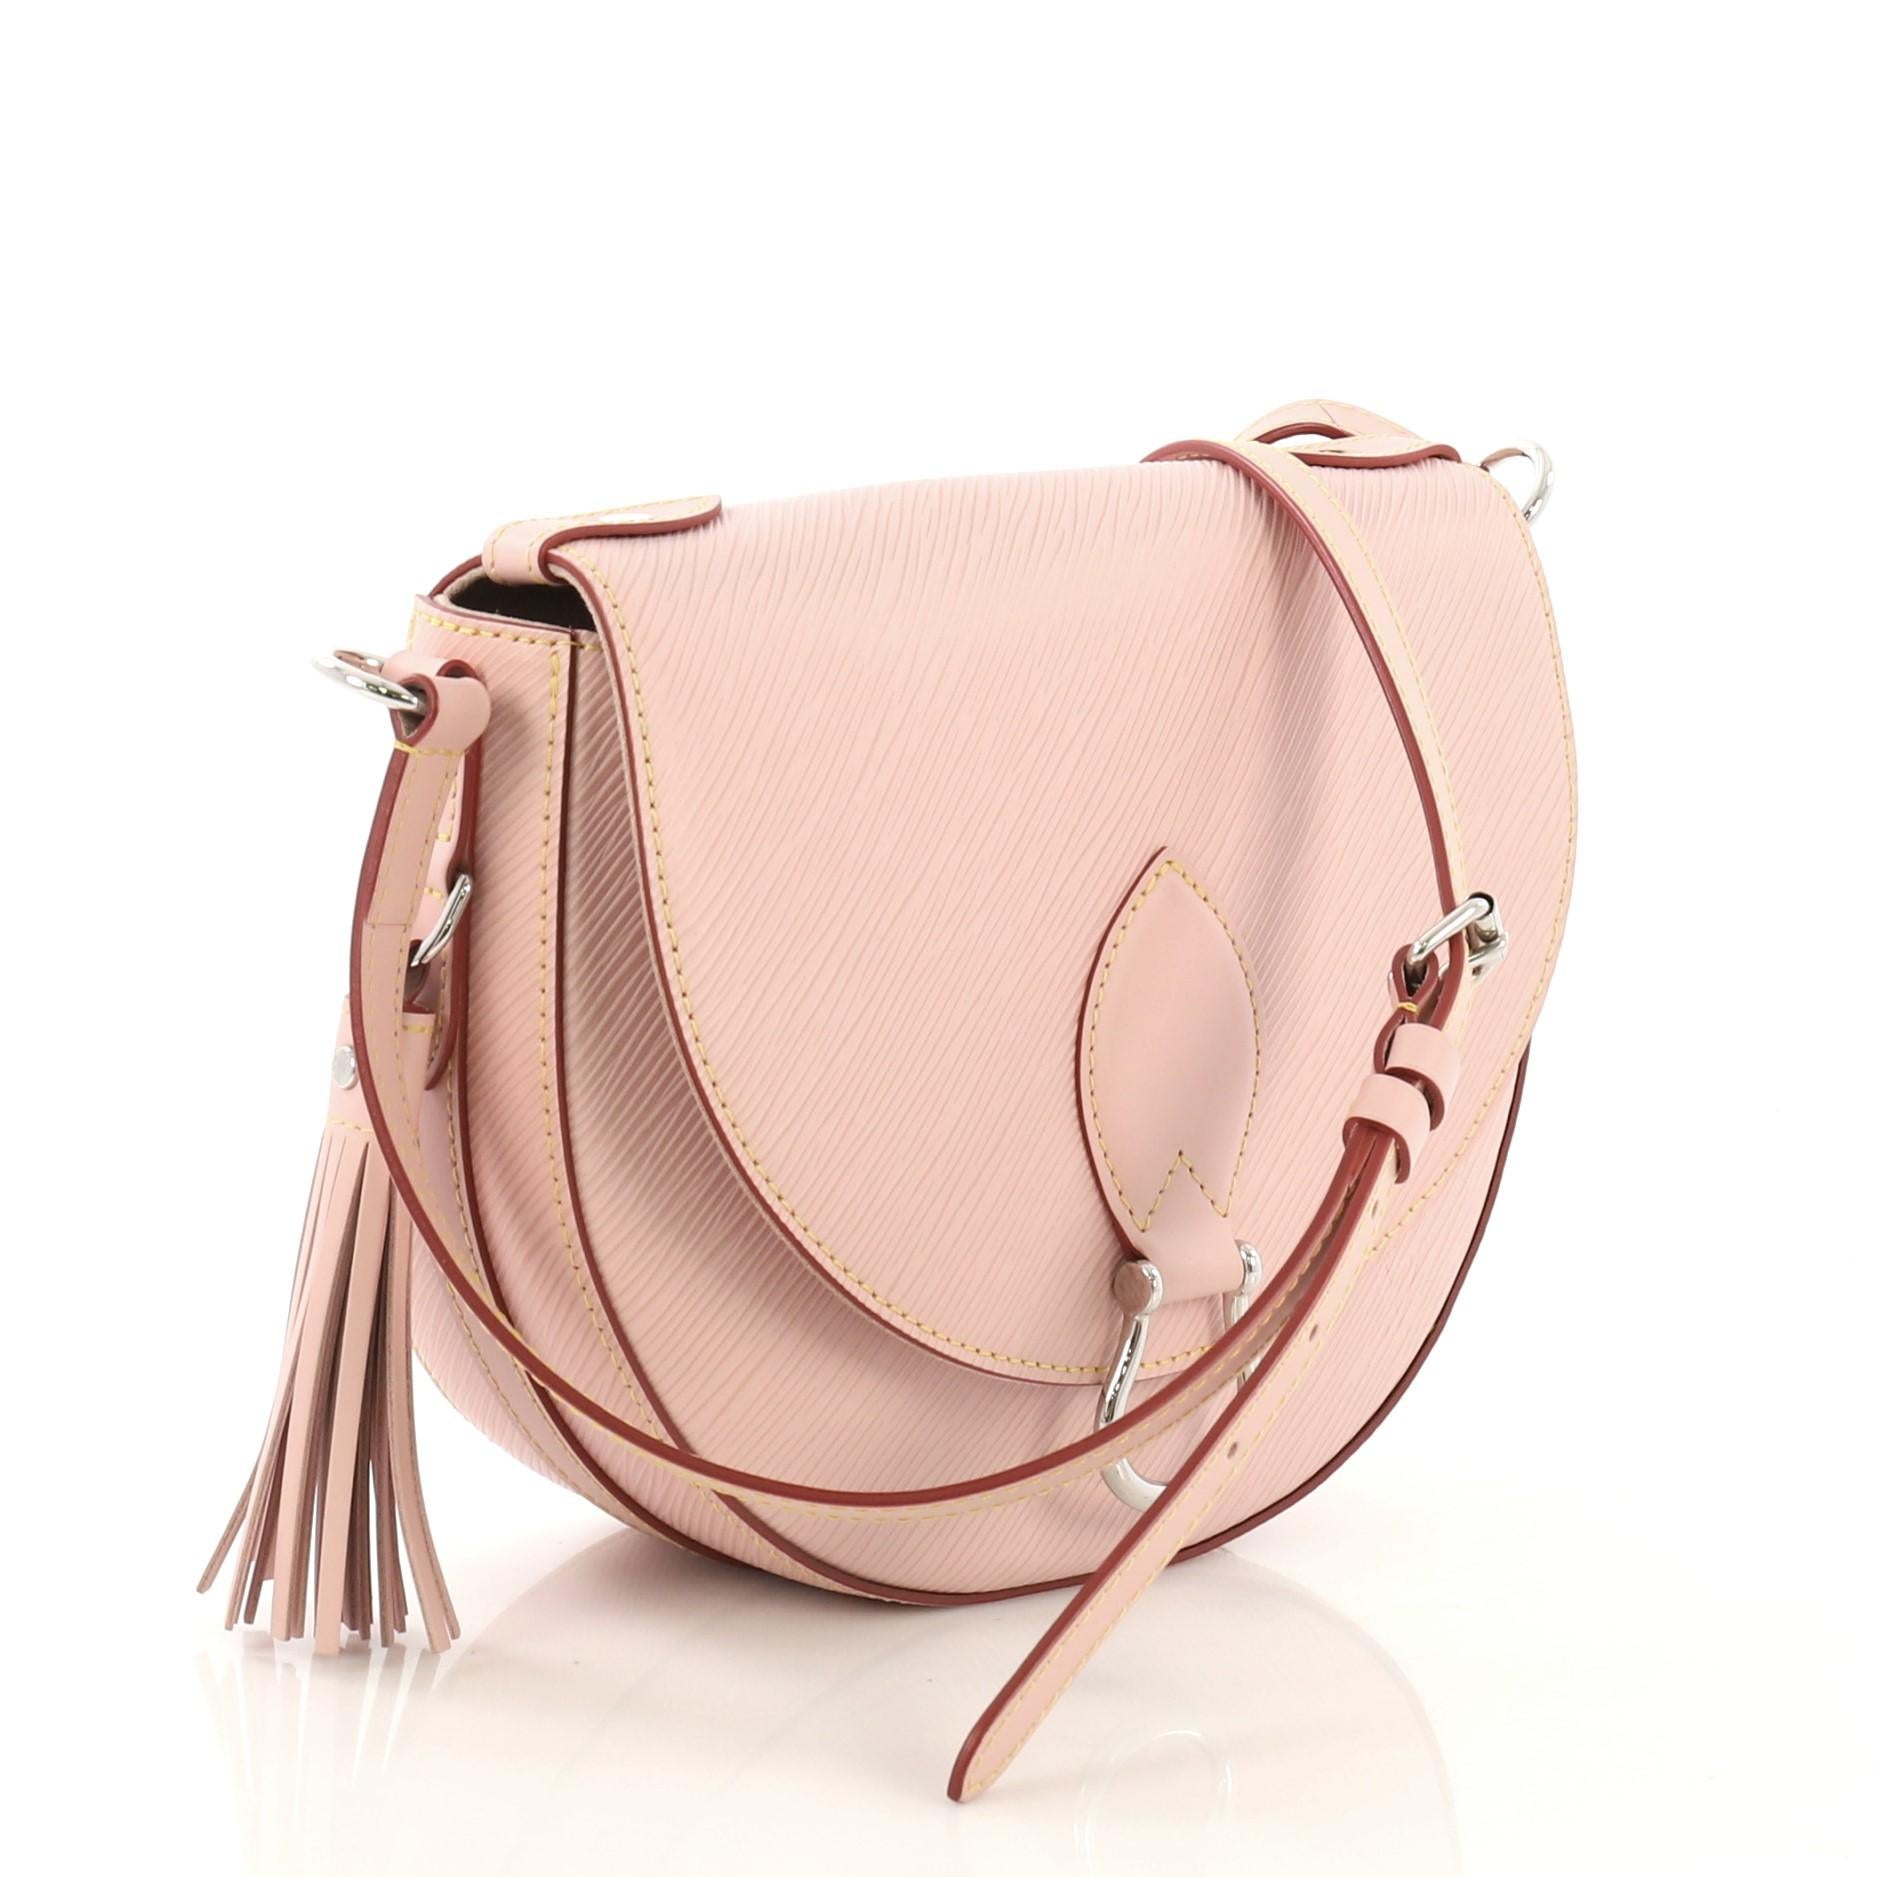 This Louis Vuitton Saint Cloud NM Bag Epi Leather, crafted in pink epi leather, features a long adjustable cross-body strap, front flap with metallic buckle, leather tassel, and silver-tone hardware. Its snap closure opens to a pink microfiber